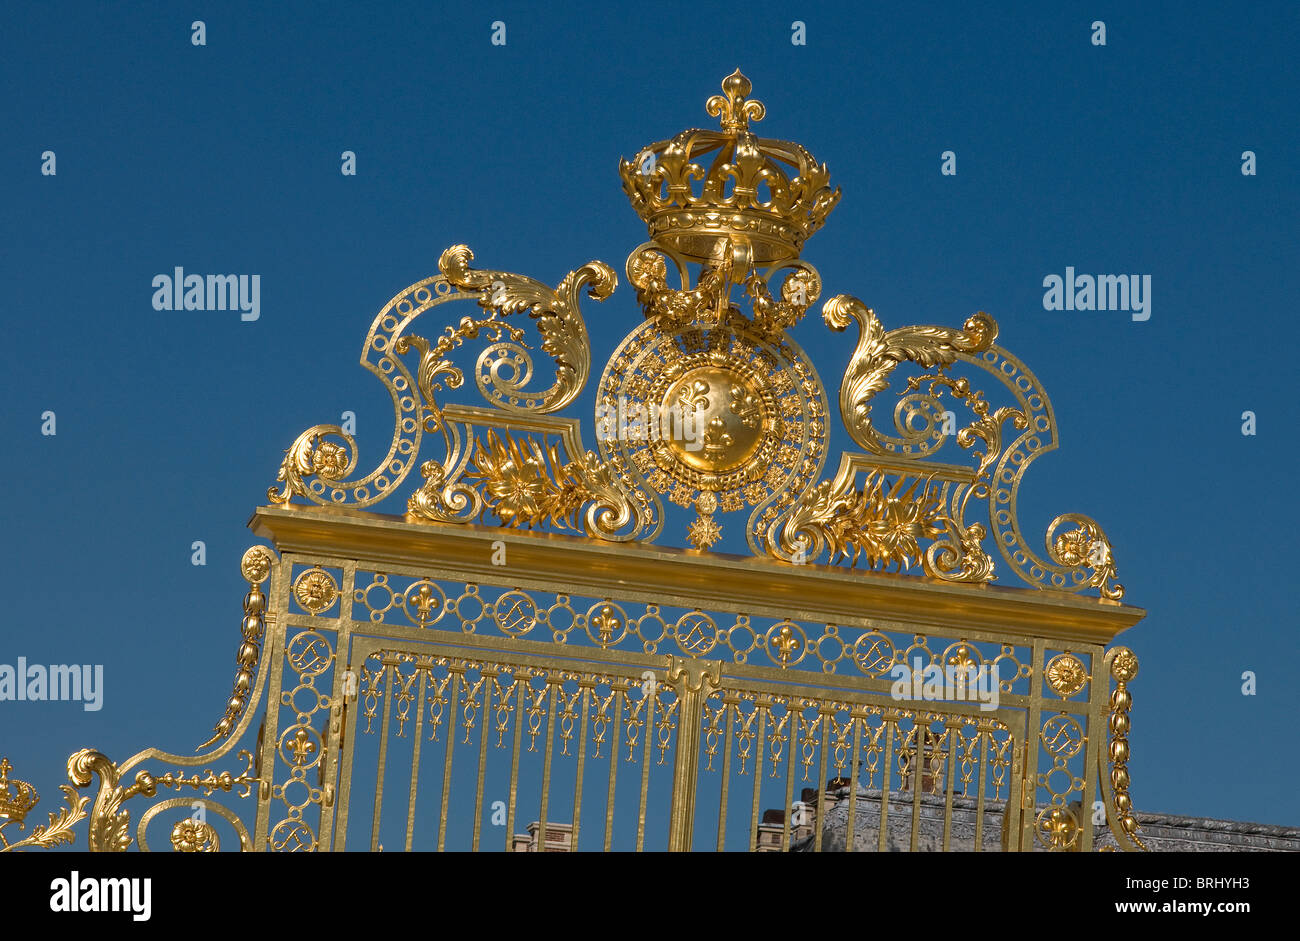 palace of versailles, france Stock Photo